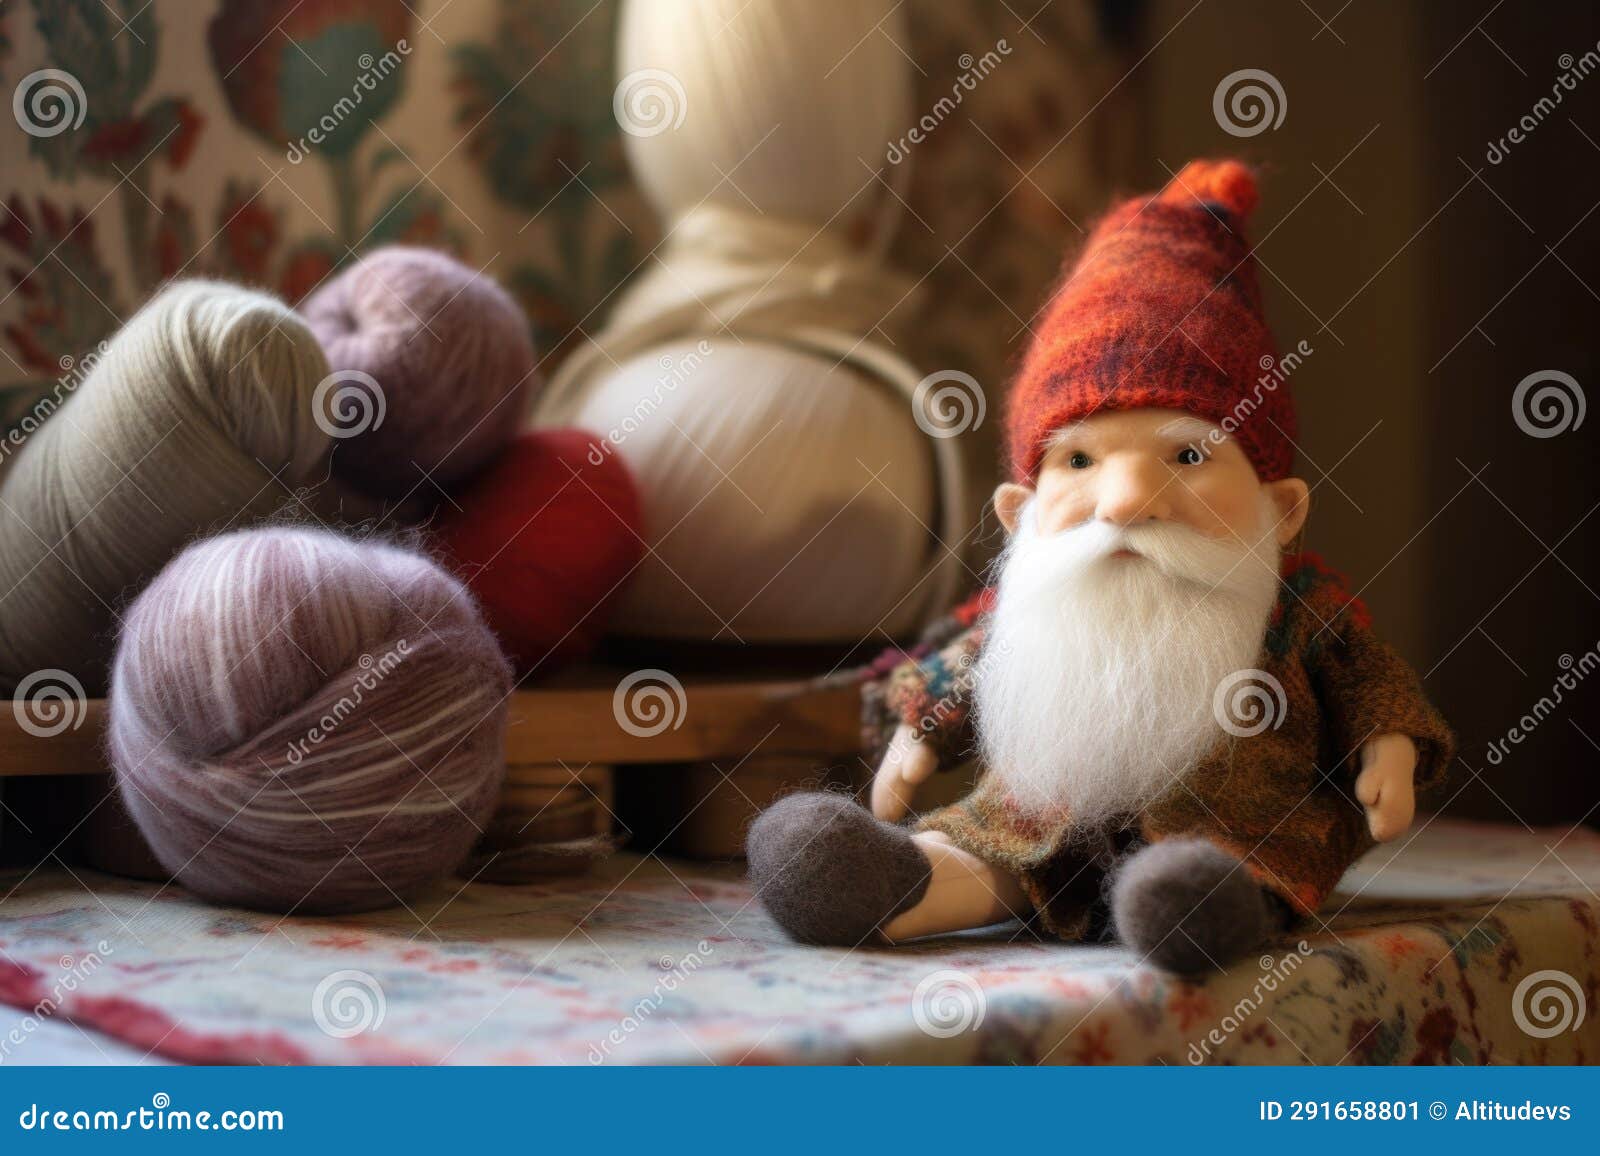 Wool For Felting On Old Wooden Background Stock Photo - Download Image Now  - Needle Felting, Wool, Animal Themes - iStock